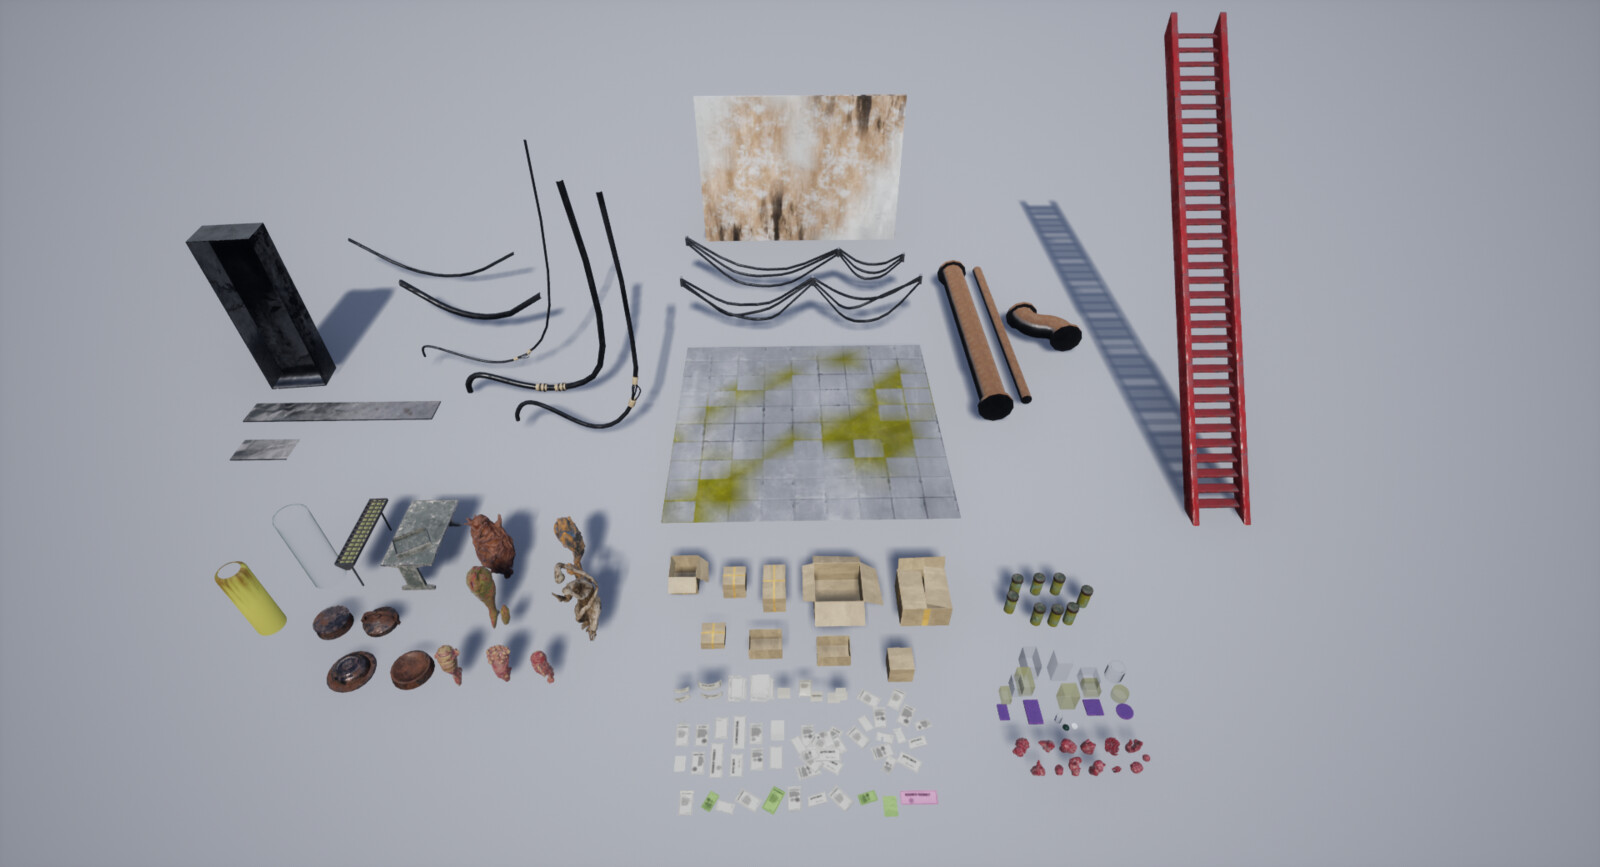 All of the assets that I made